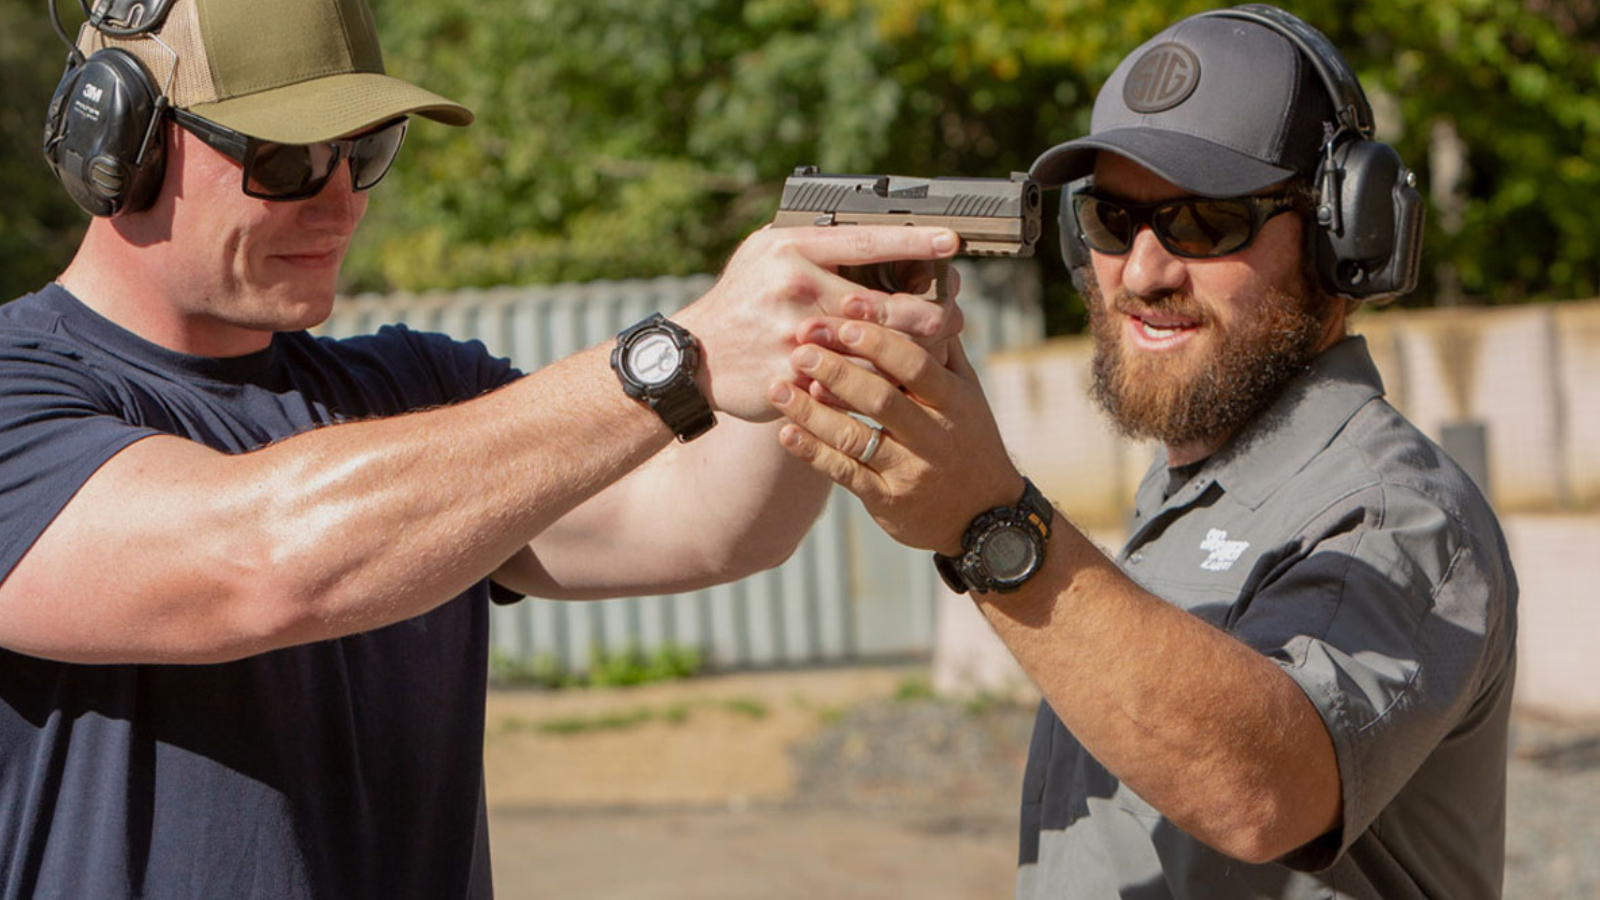 Sig Sauer “Buy Now” Capability Added To SigSauer.com featured img